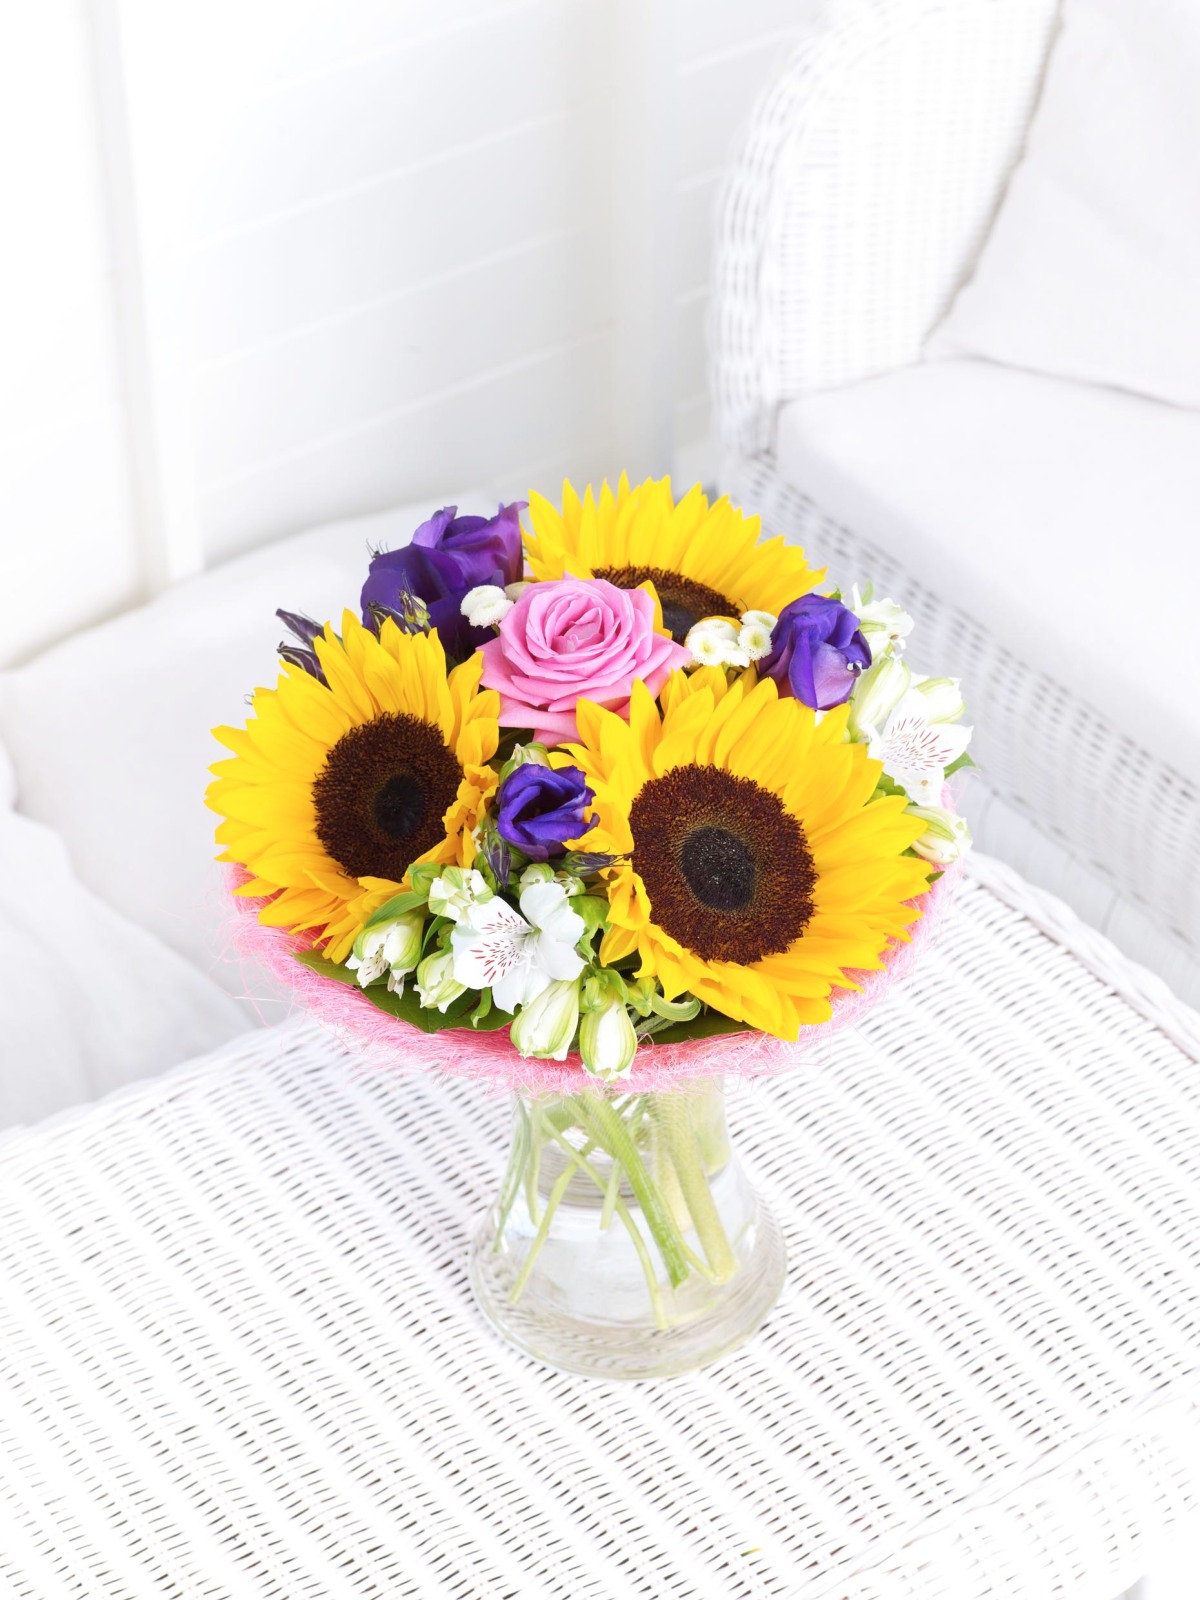 Perfect gift with Sunflowers